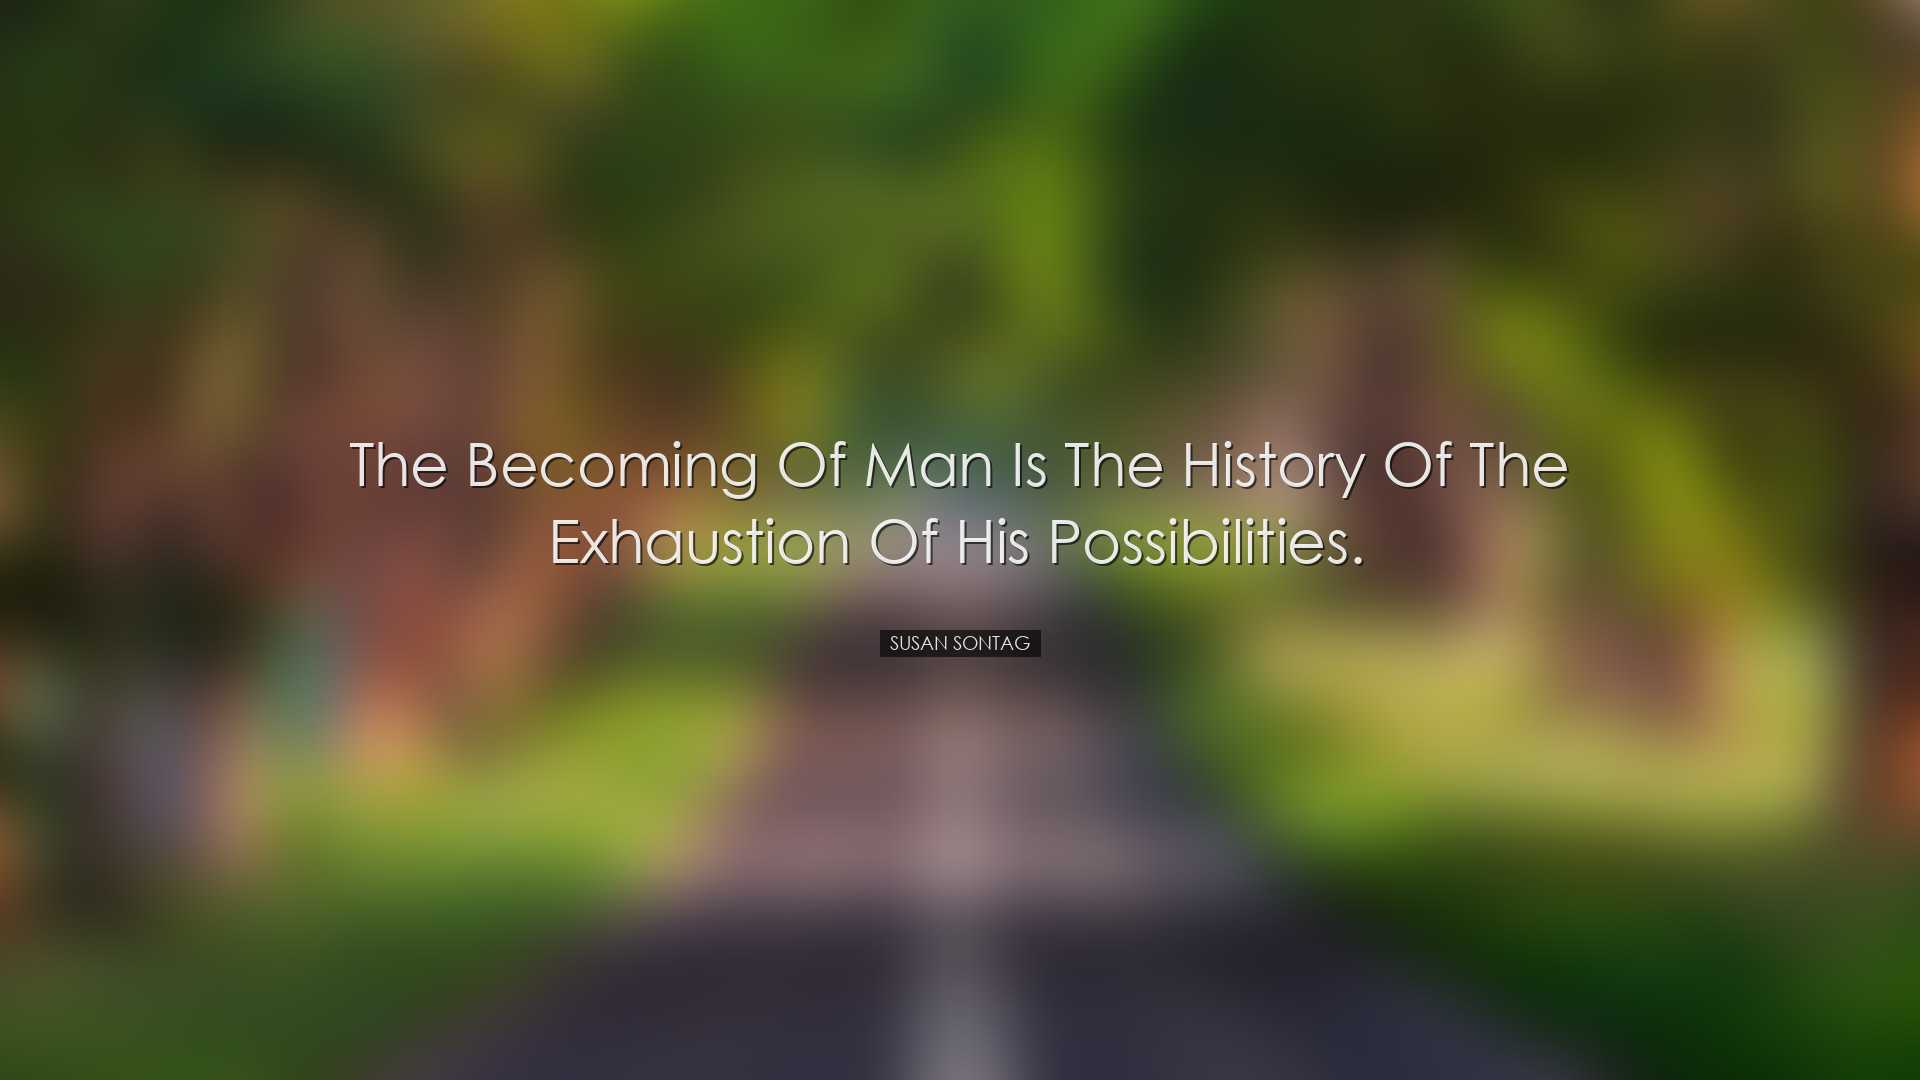 The becoming of man is the history of the exhaustion of his possib